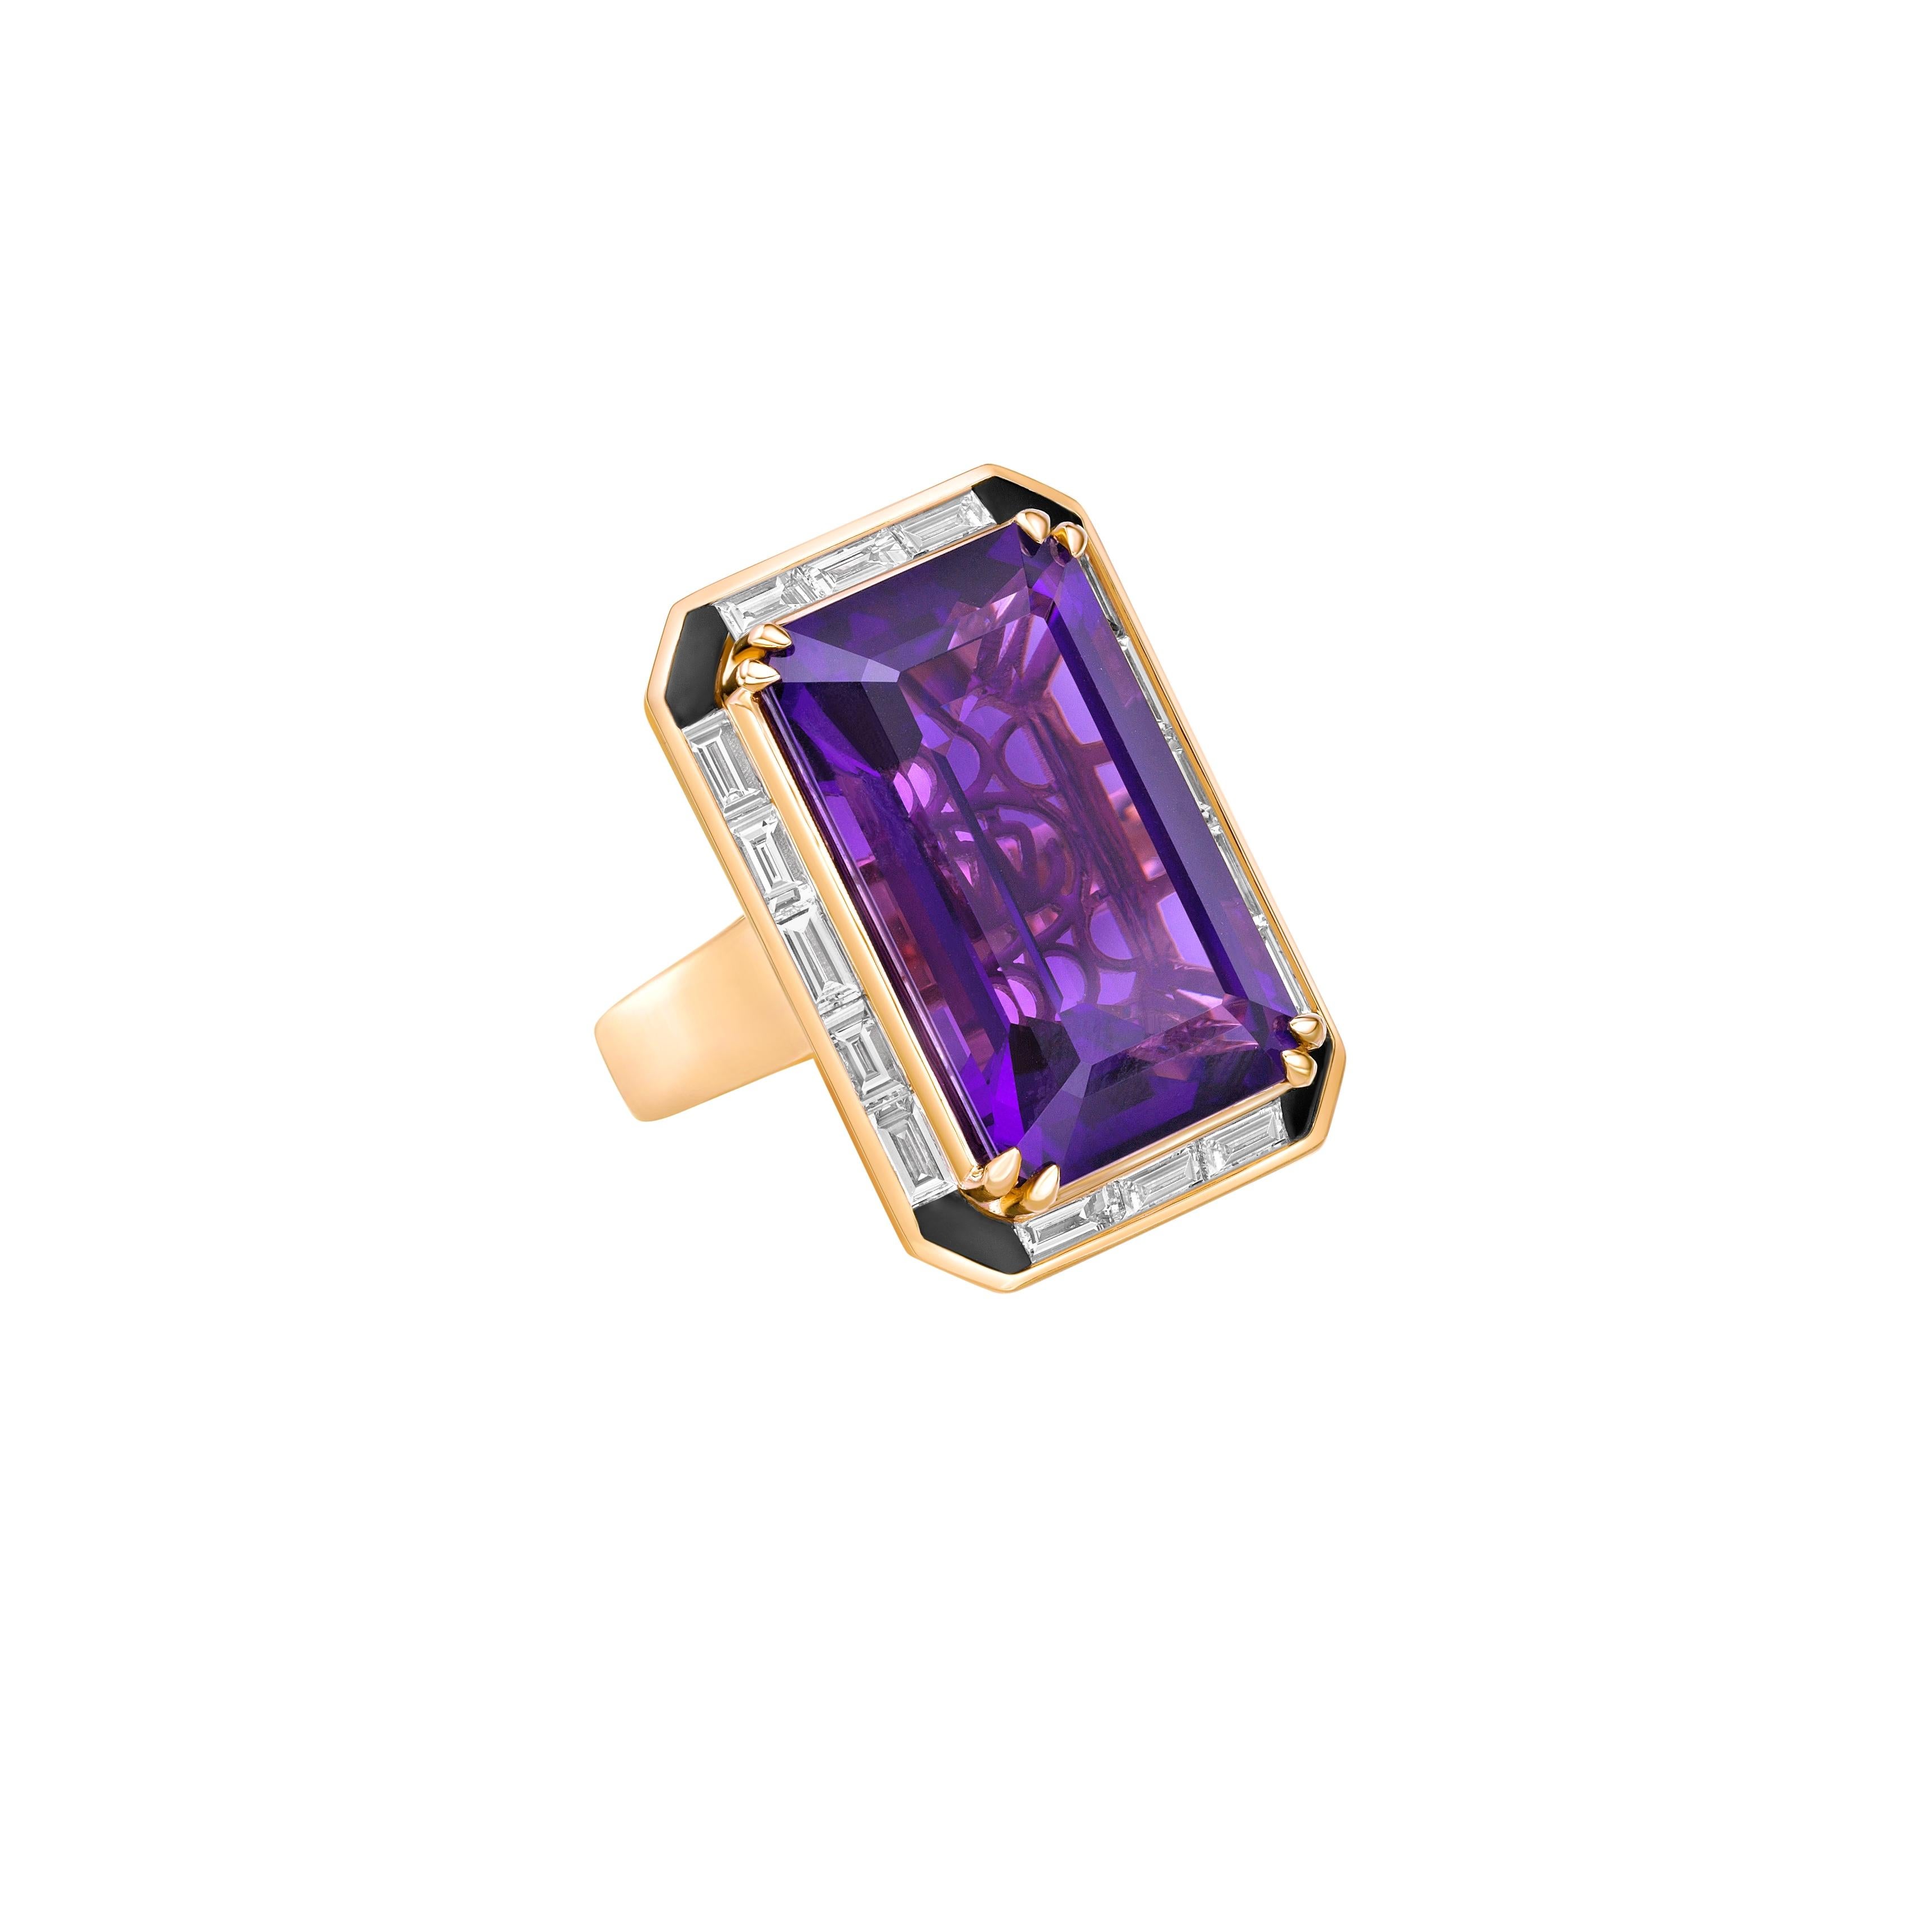 Presented A stunning amethyst ring for those who respect quality and wish to wear it to any event or celebration. The black onyx inset on the ring's four sides highlights its brilliance. The Yellow Gold Amethyst Fancy Ring with White Diamonds has a